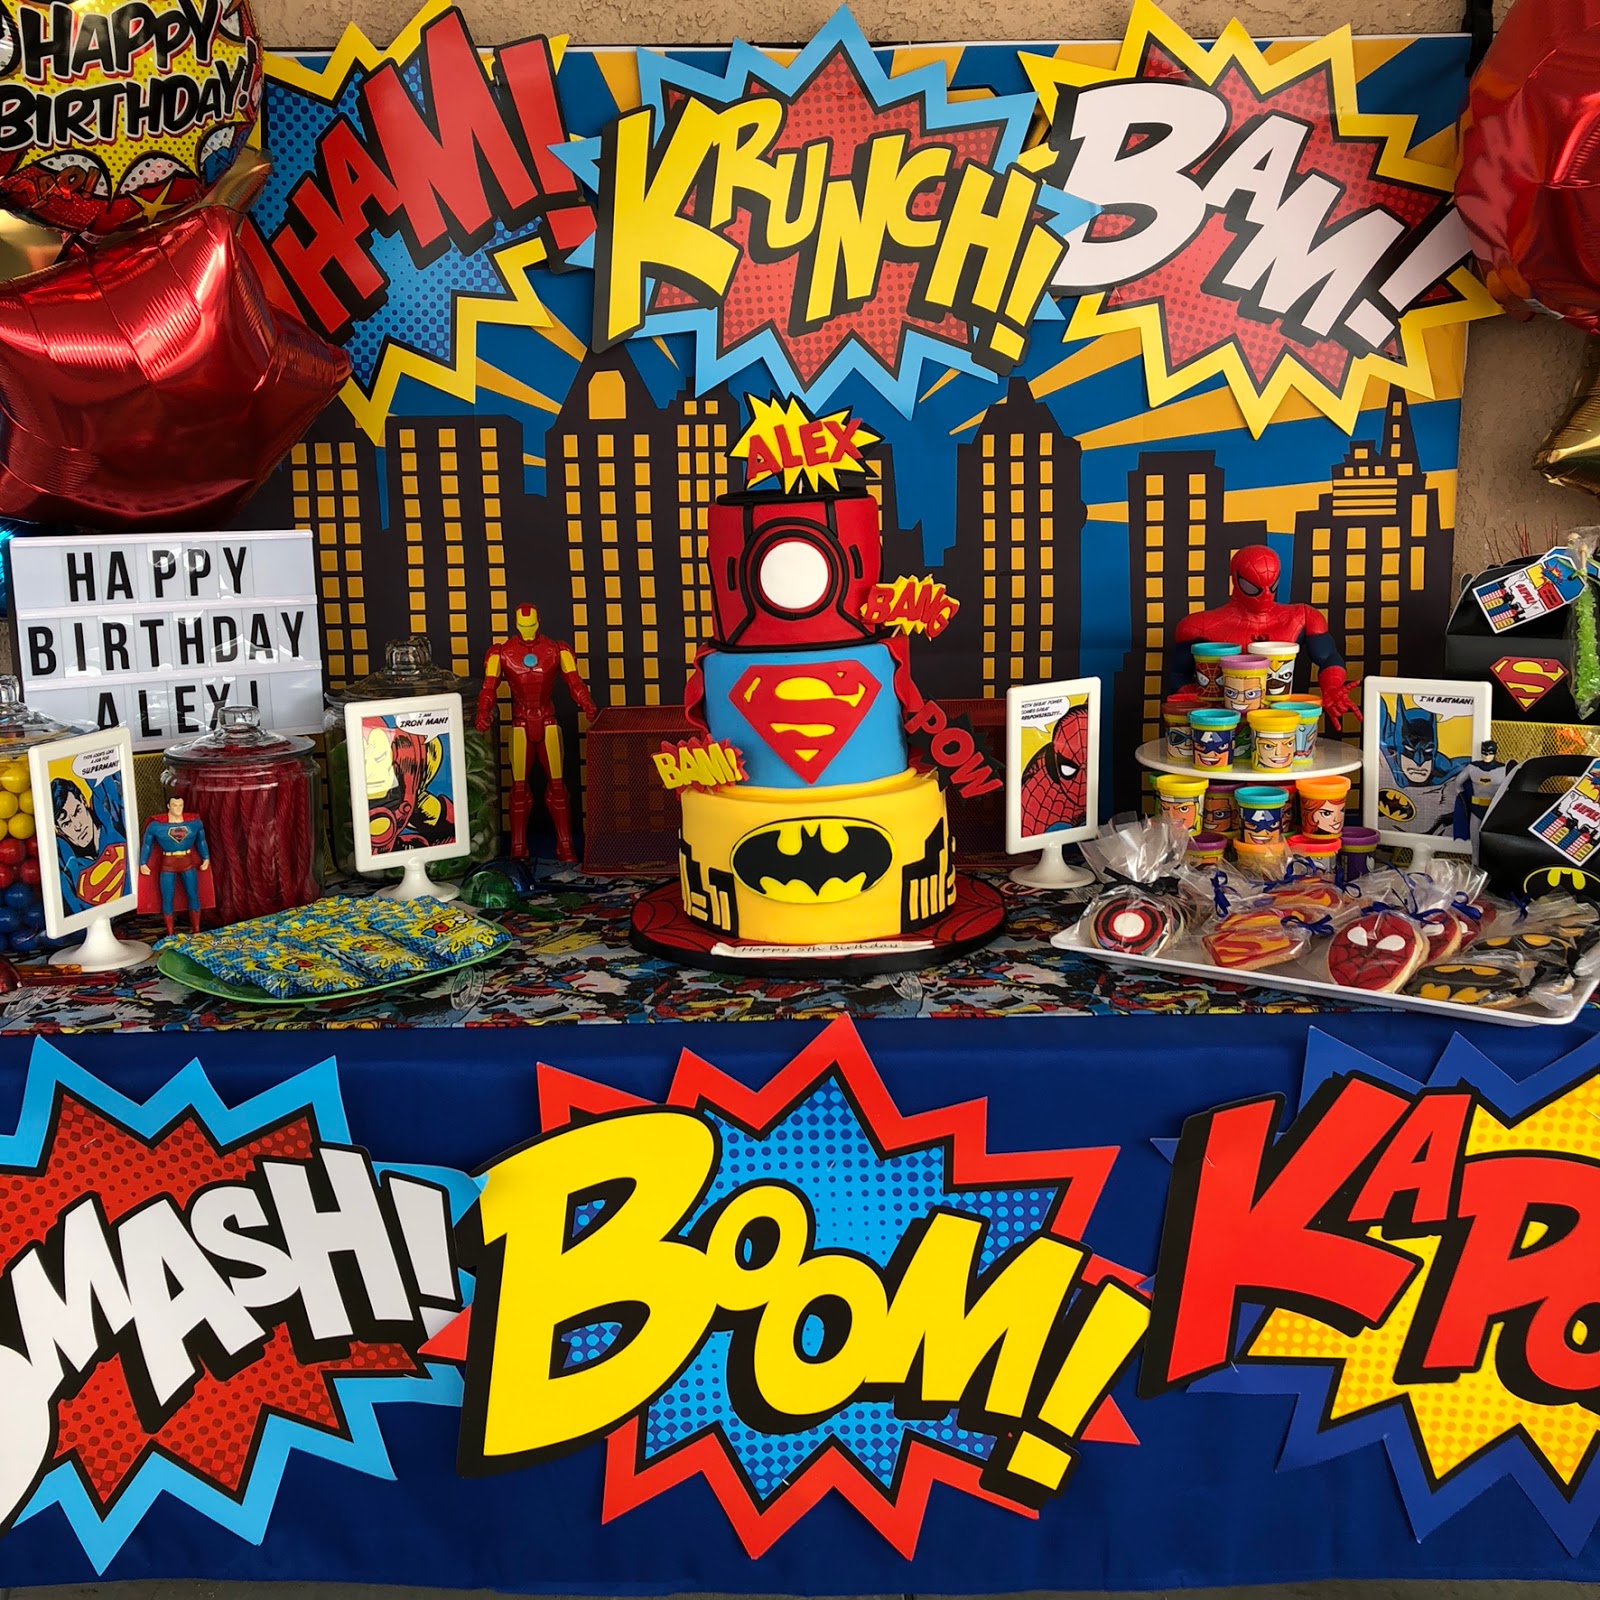 17 Birthday Party Themes for your Kid - BookMyPainting